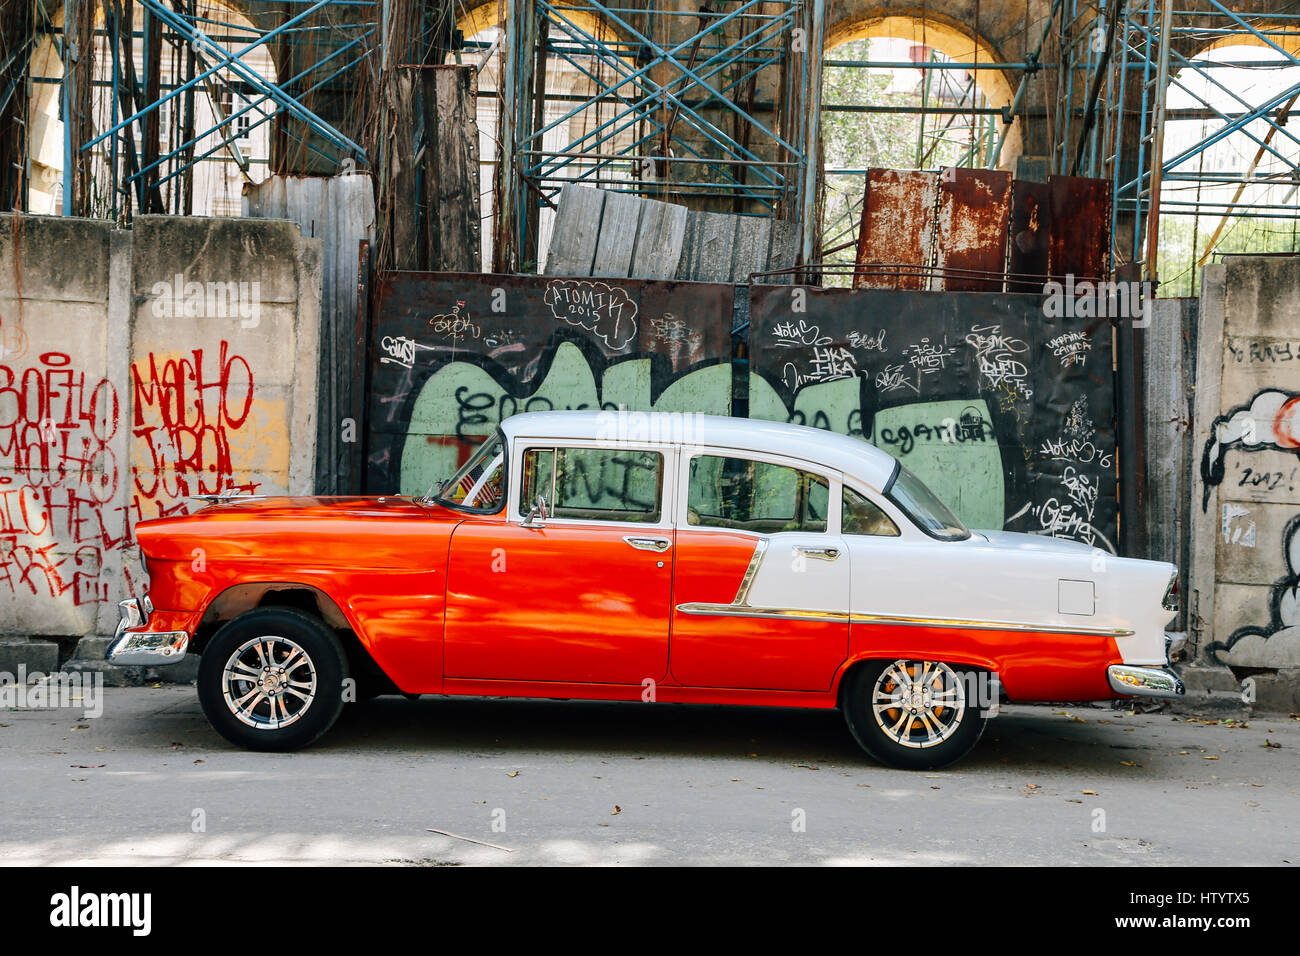 A classic white and orange Chevrolet car on a road in Havana, Cuba Stock Photo